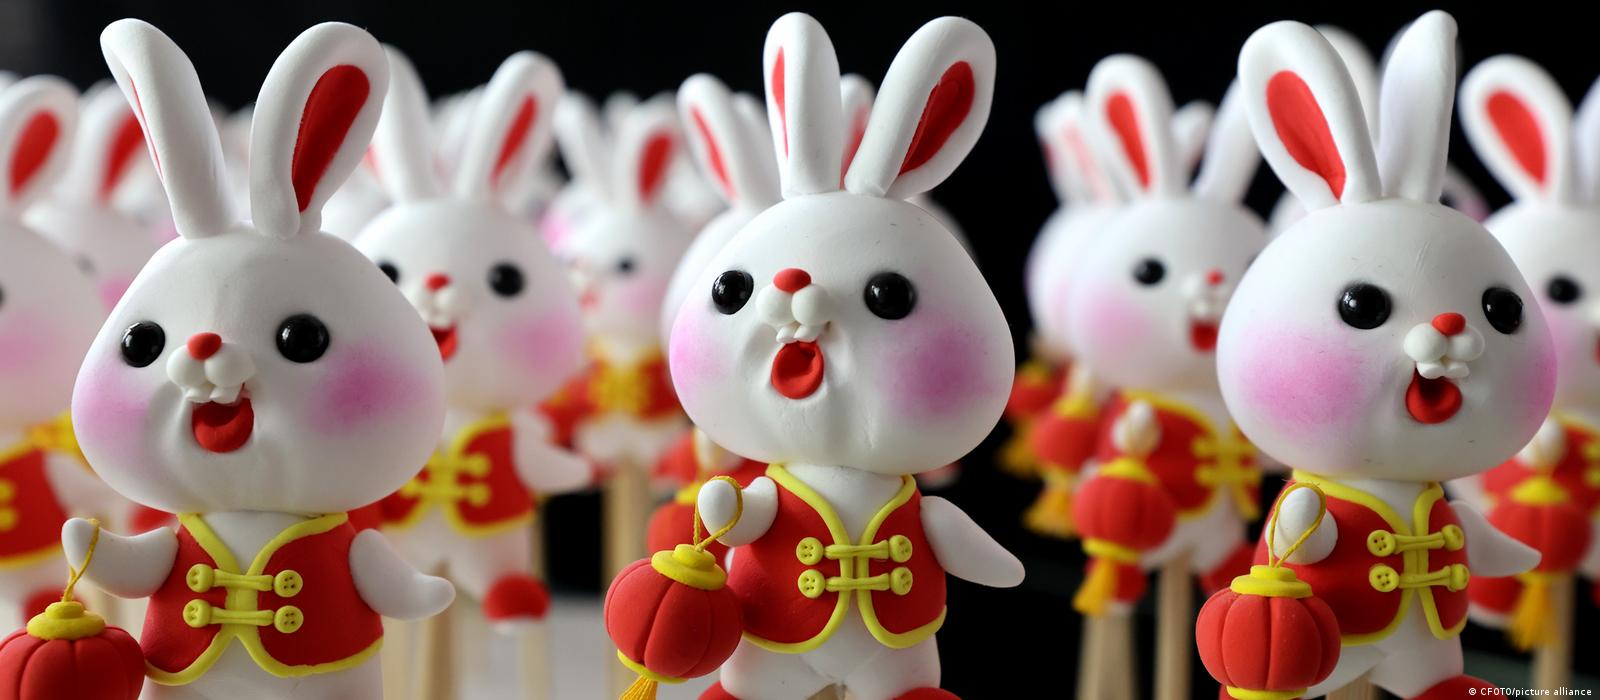 Lunar New Year 2023 launches the Year of the Rabbit